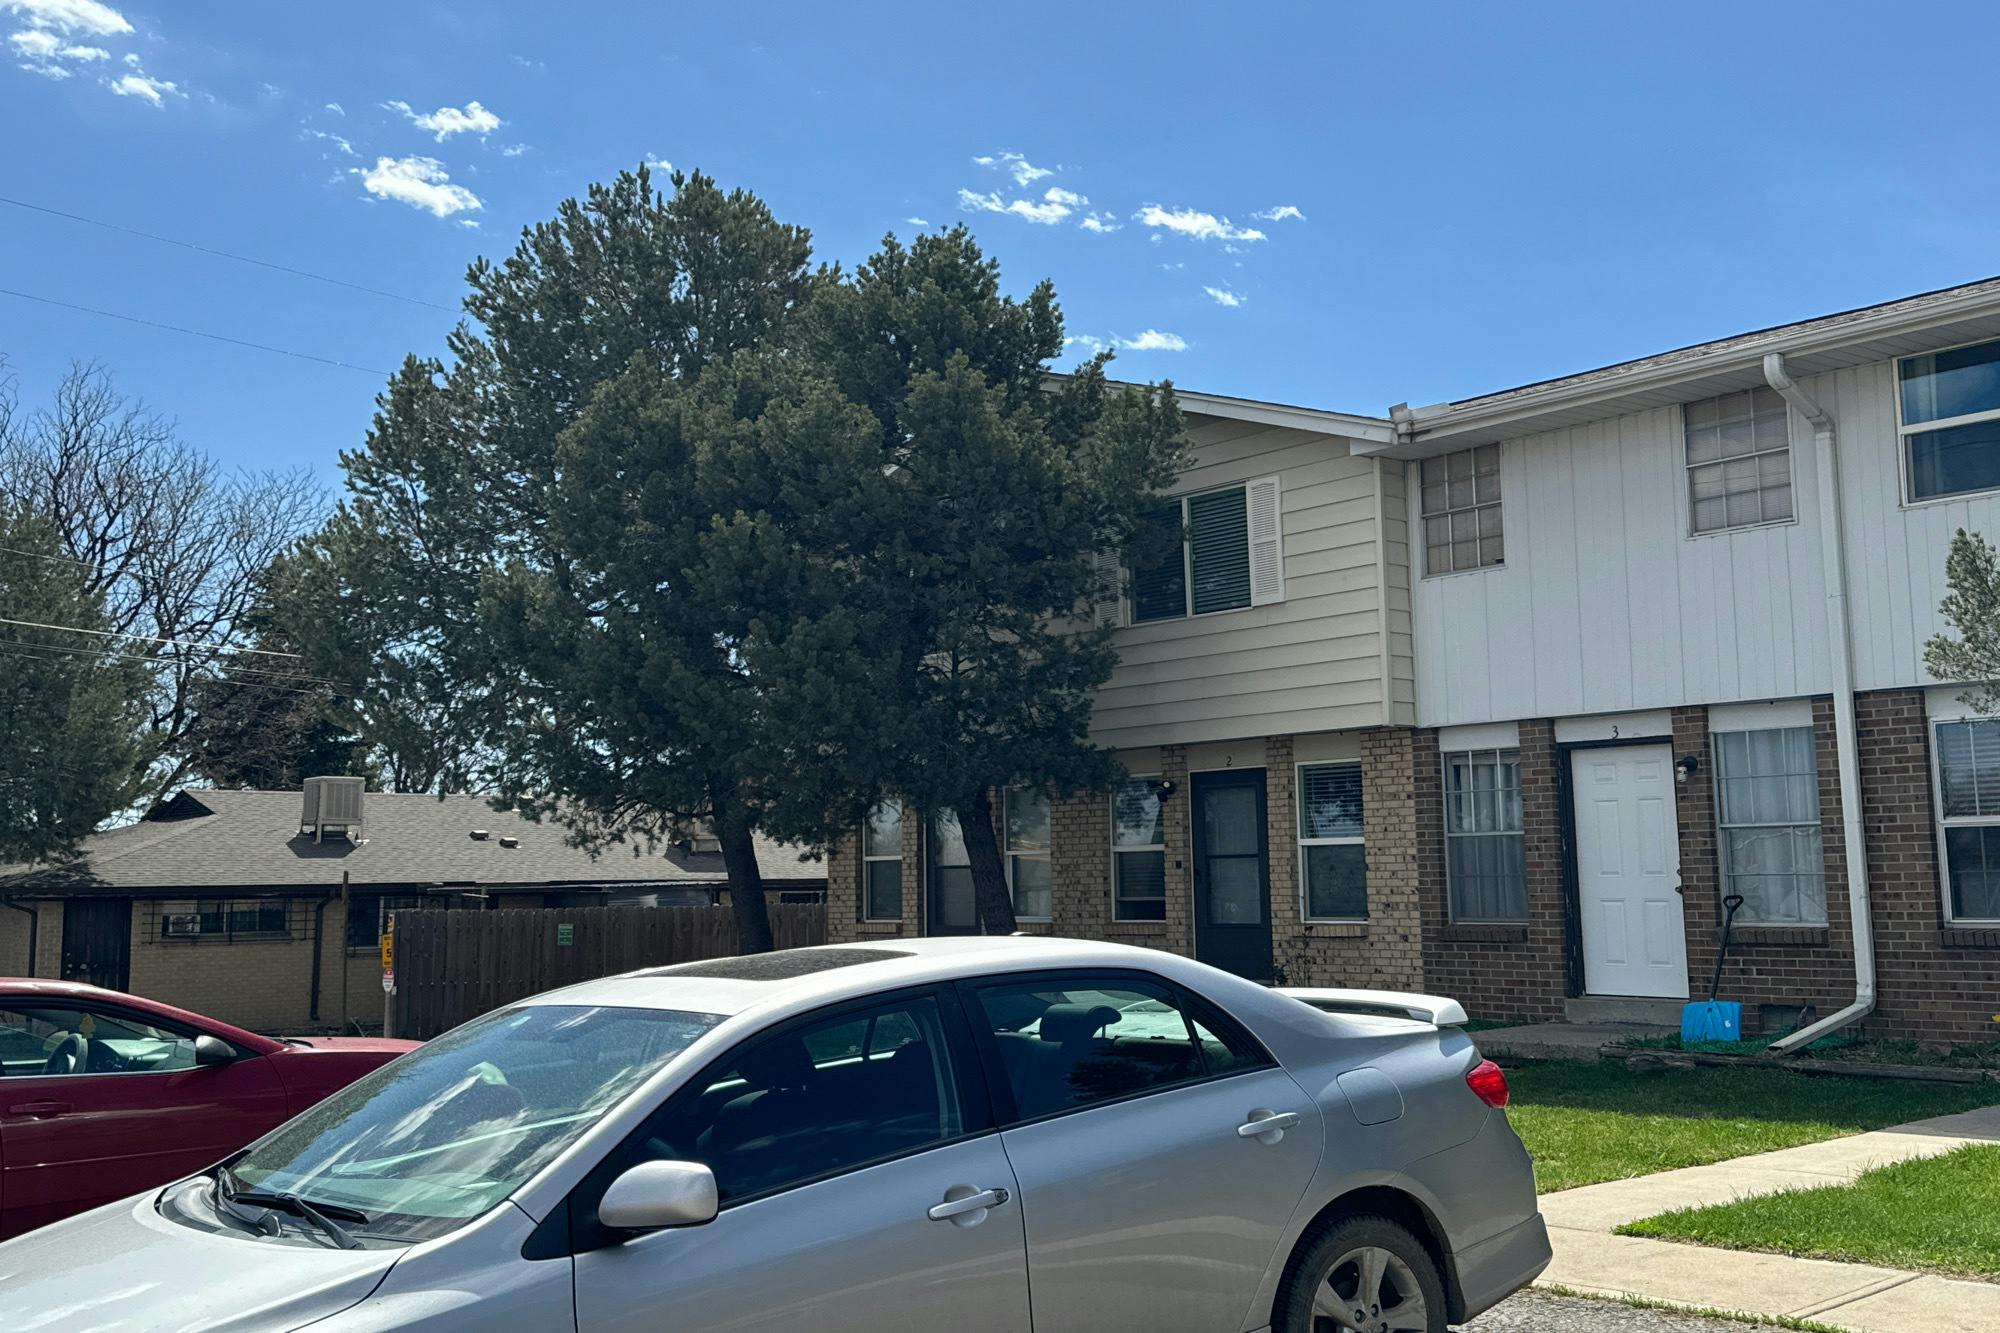 14th Ave, Lakewood, CO 80214 #1